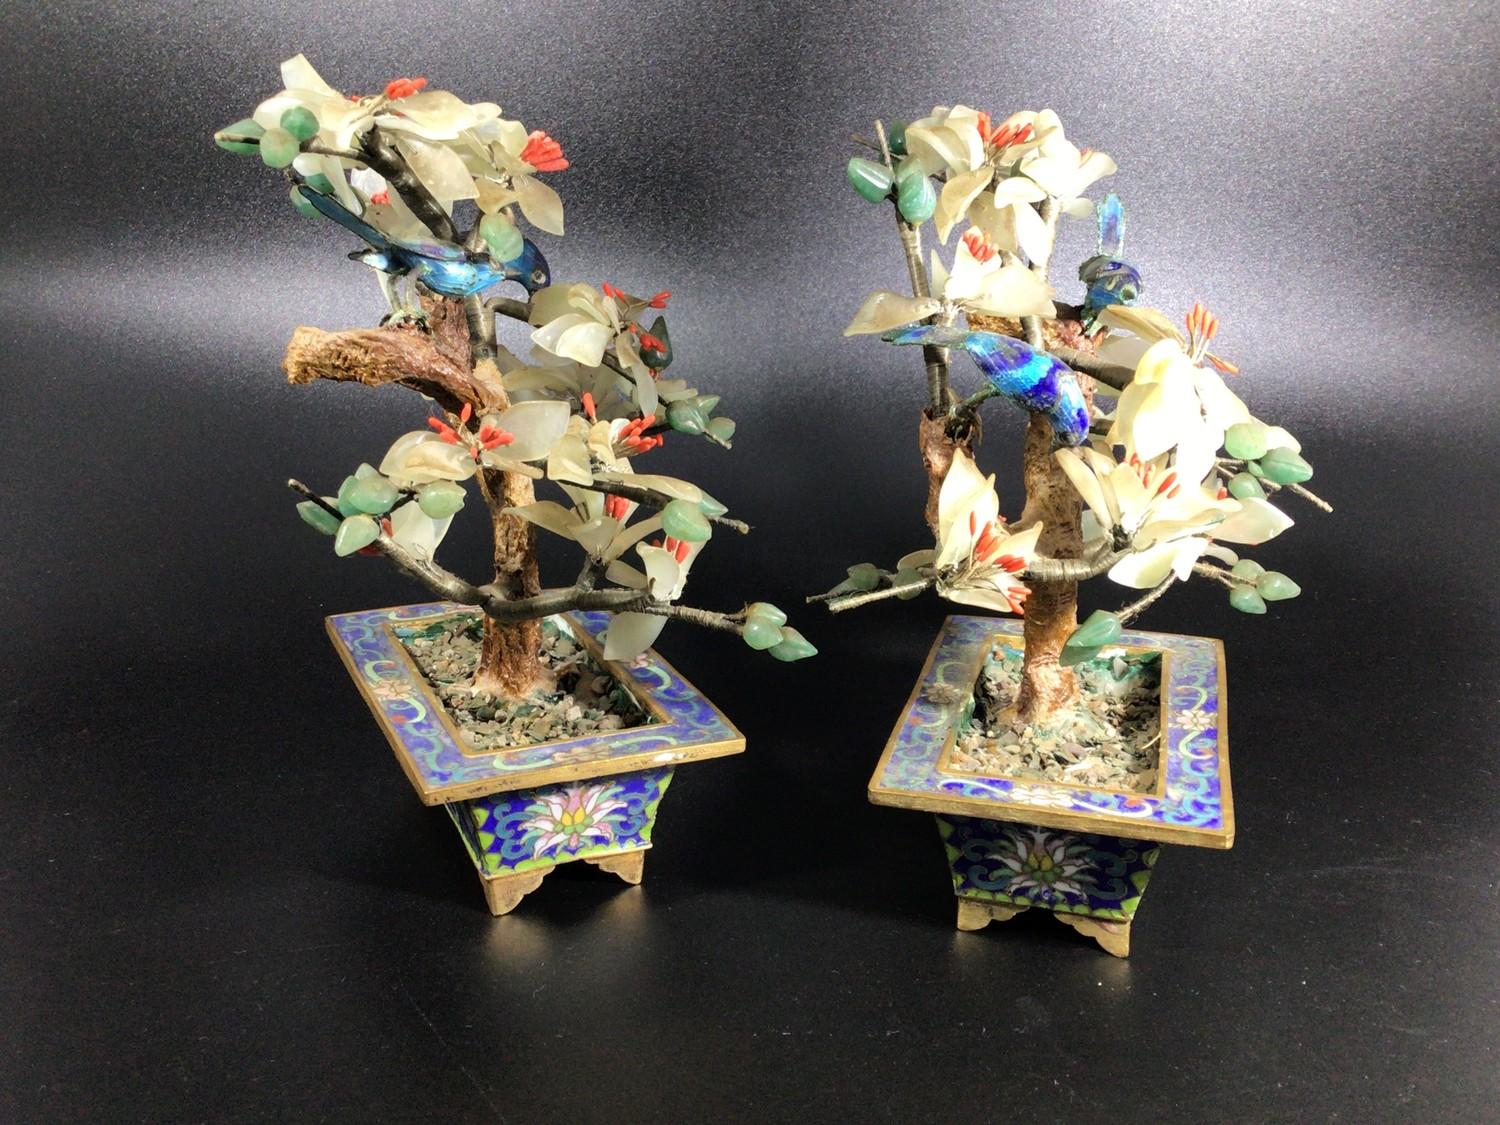 A pair of Oriental cloisonné enamel and hard stone bonsai trees with red, white and green blossom - Bild 2 aus 4